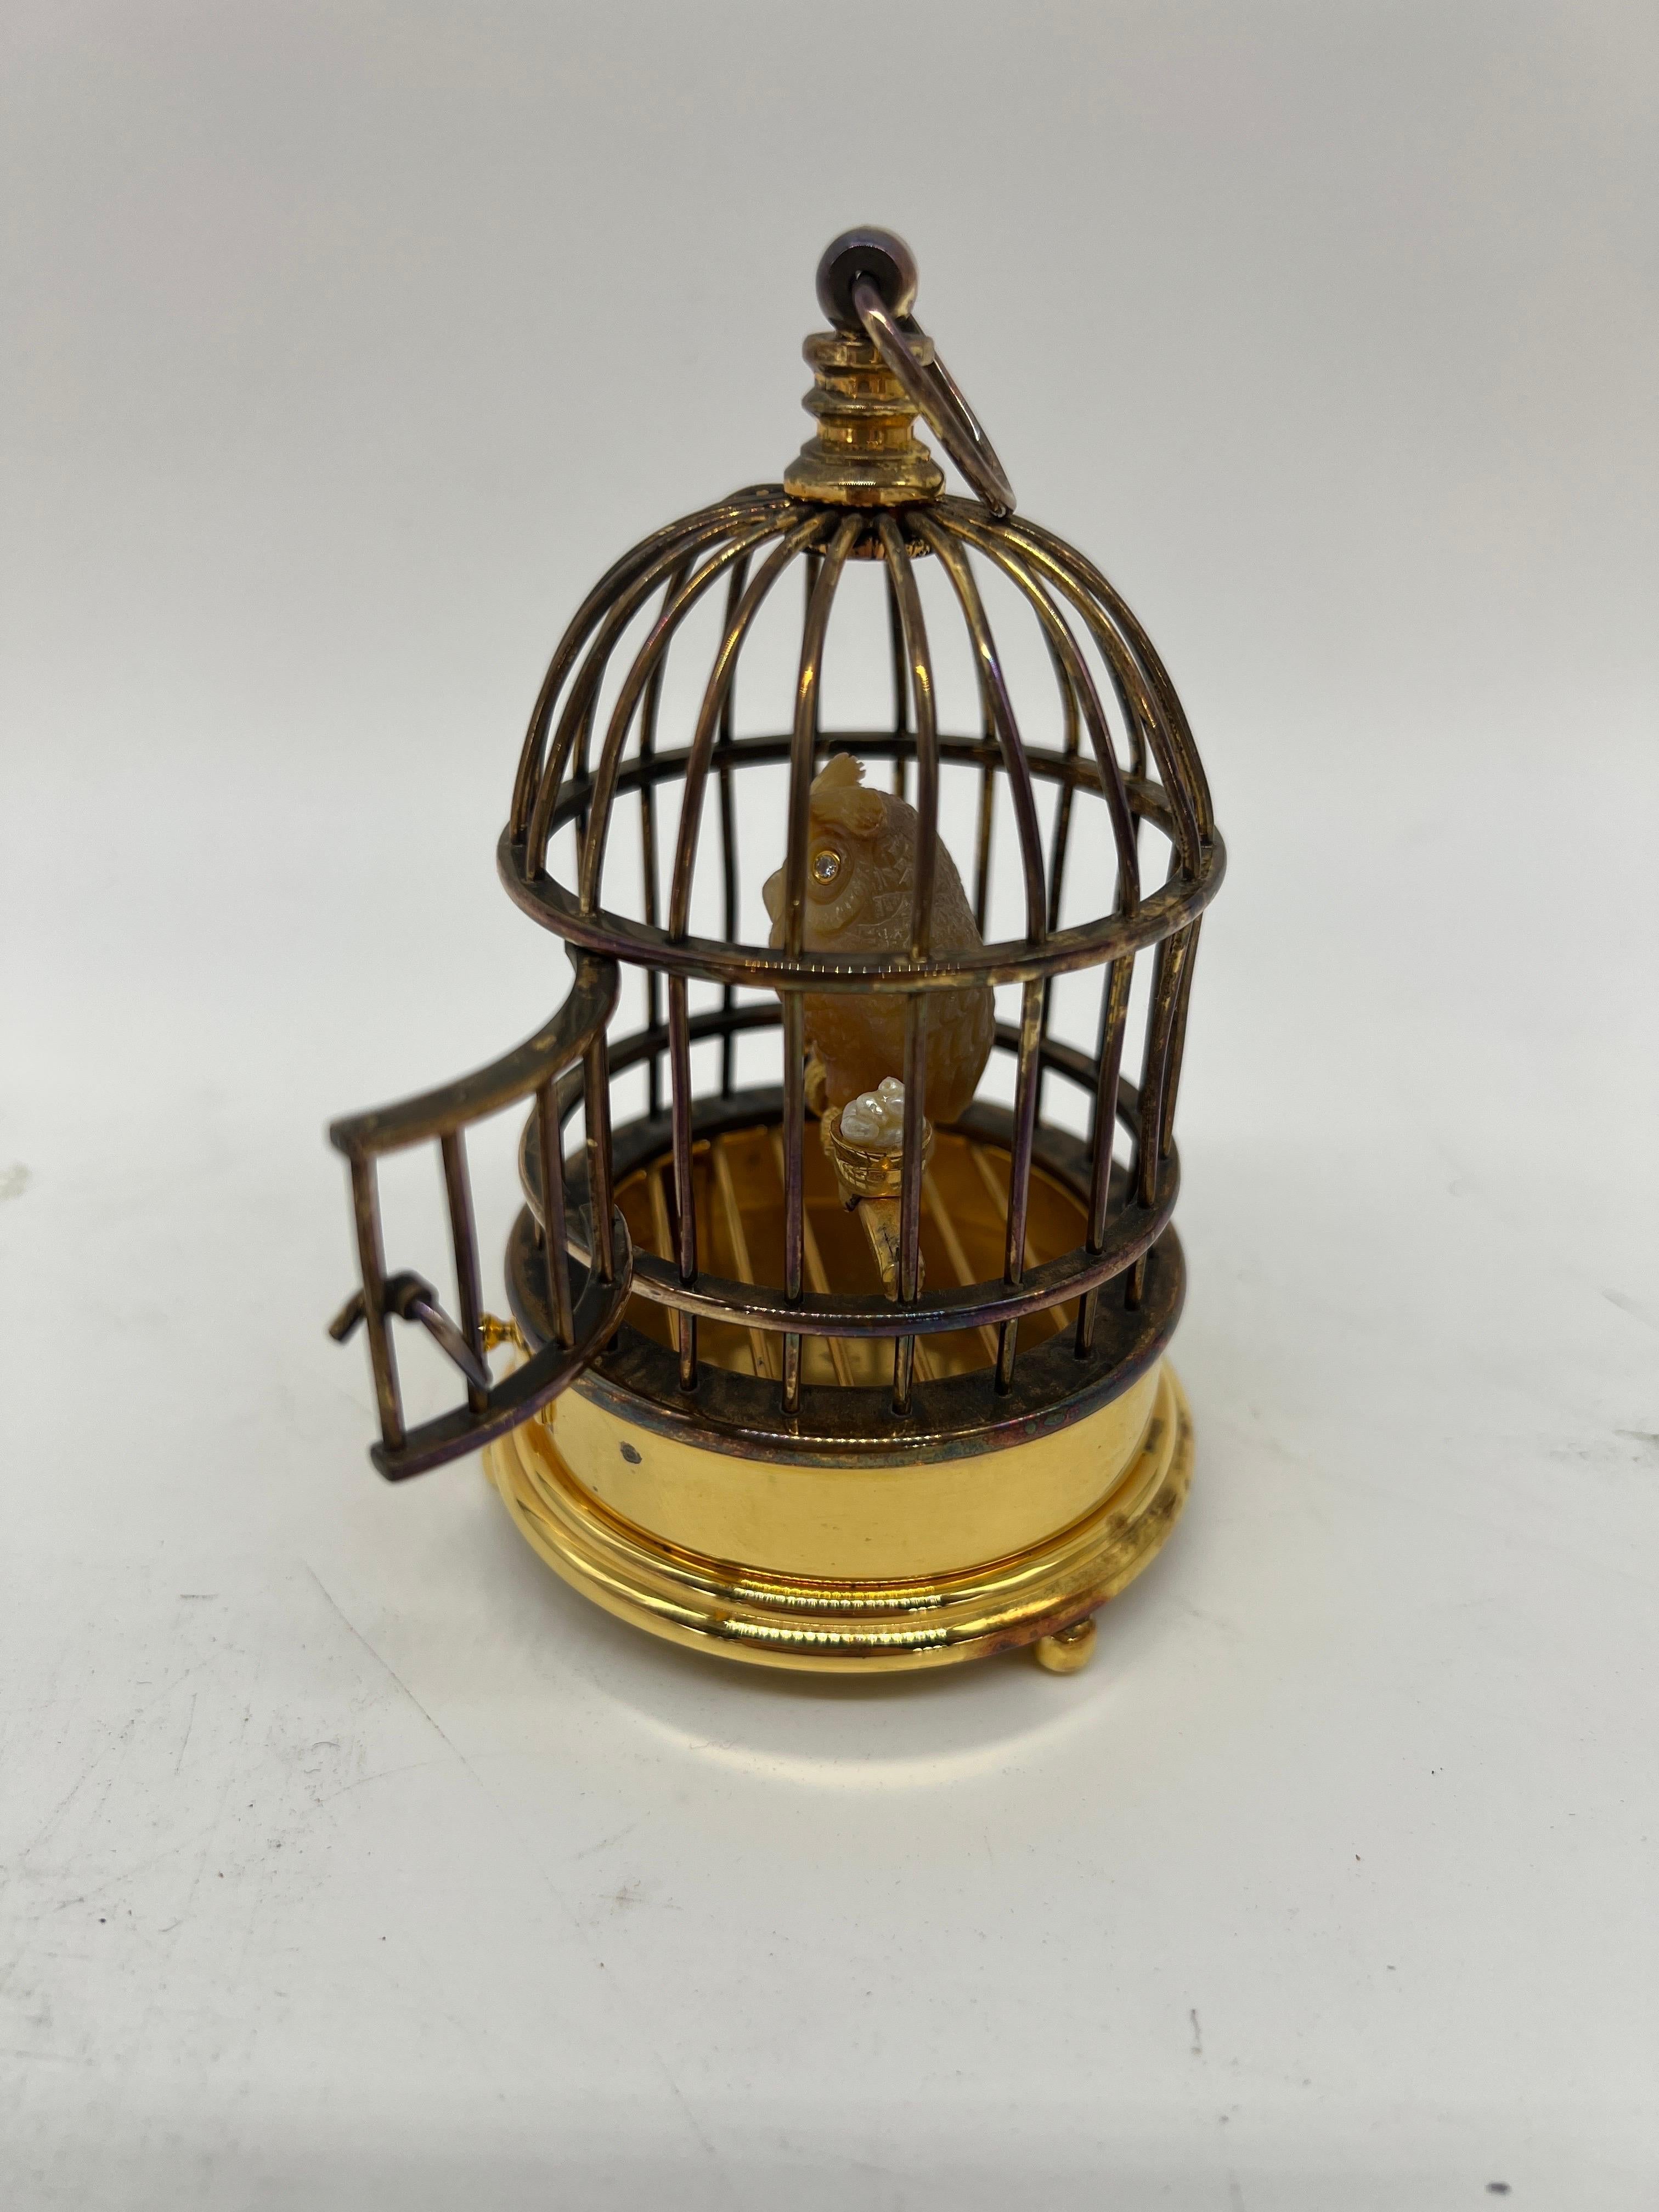 Faberge, Jeweled and Silver-Gilt Model of an Owl in a Cage Diamond & Sterling In Good Condition For Sale In Atlanta, GA